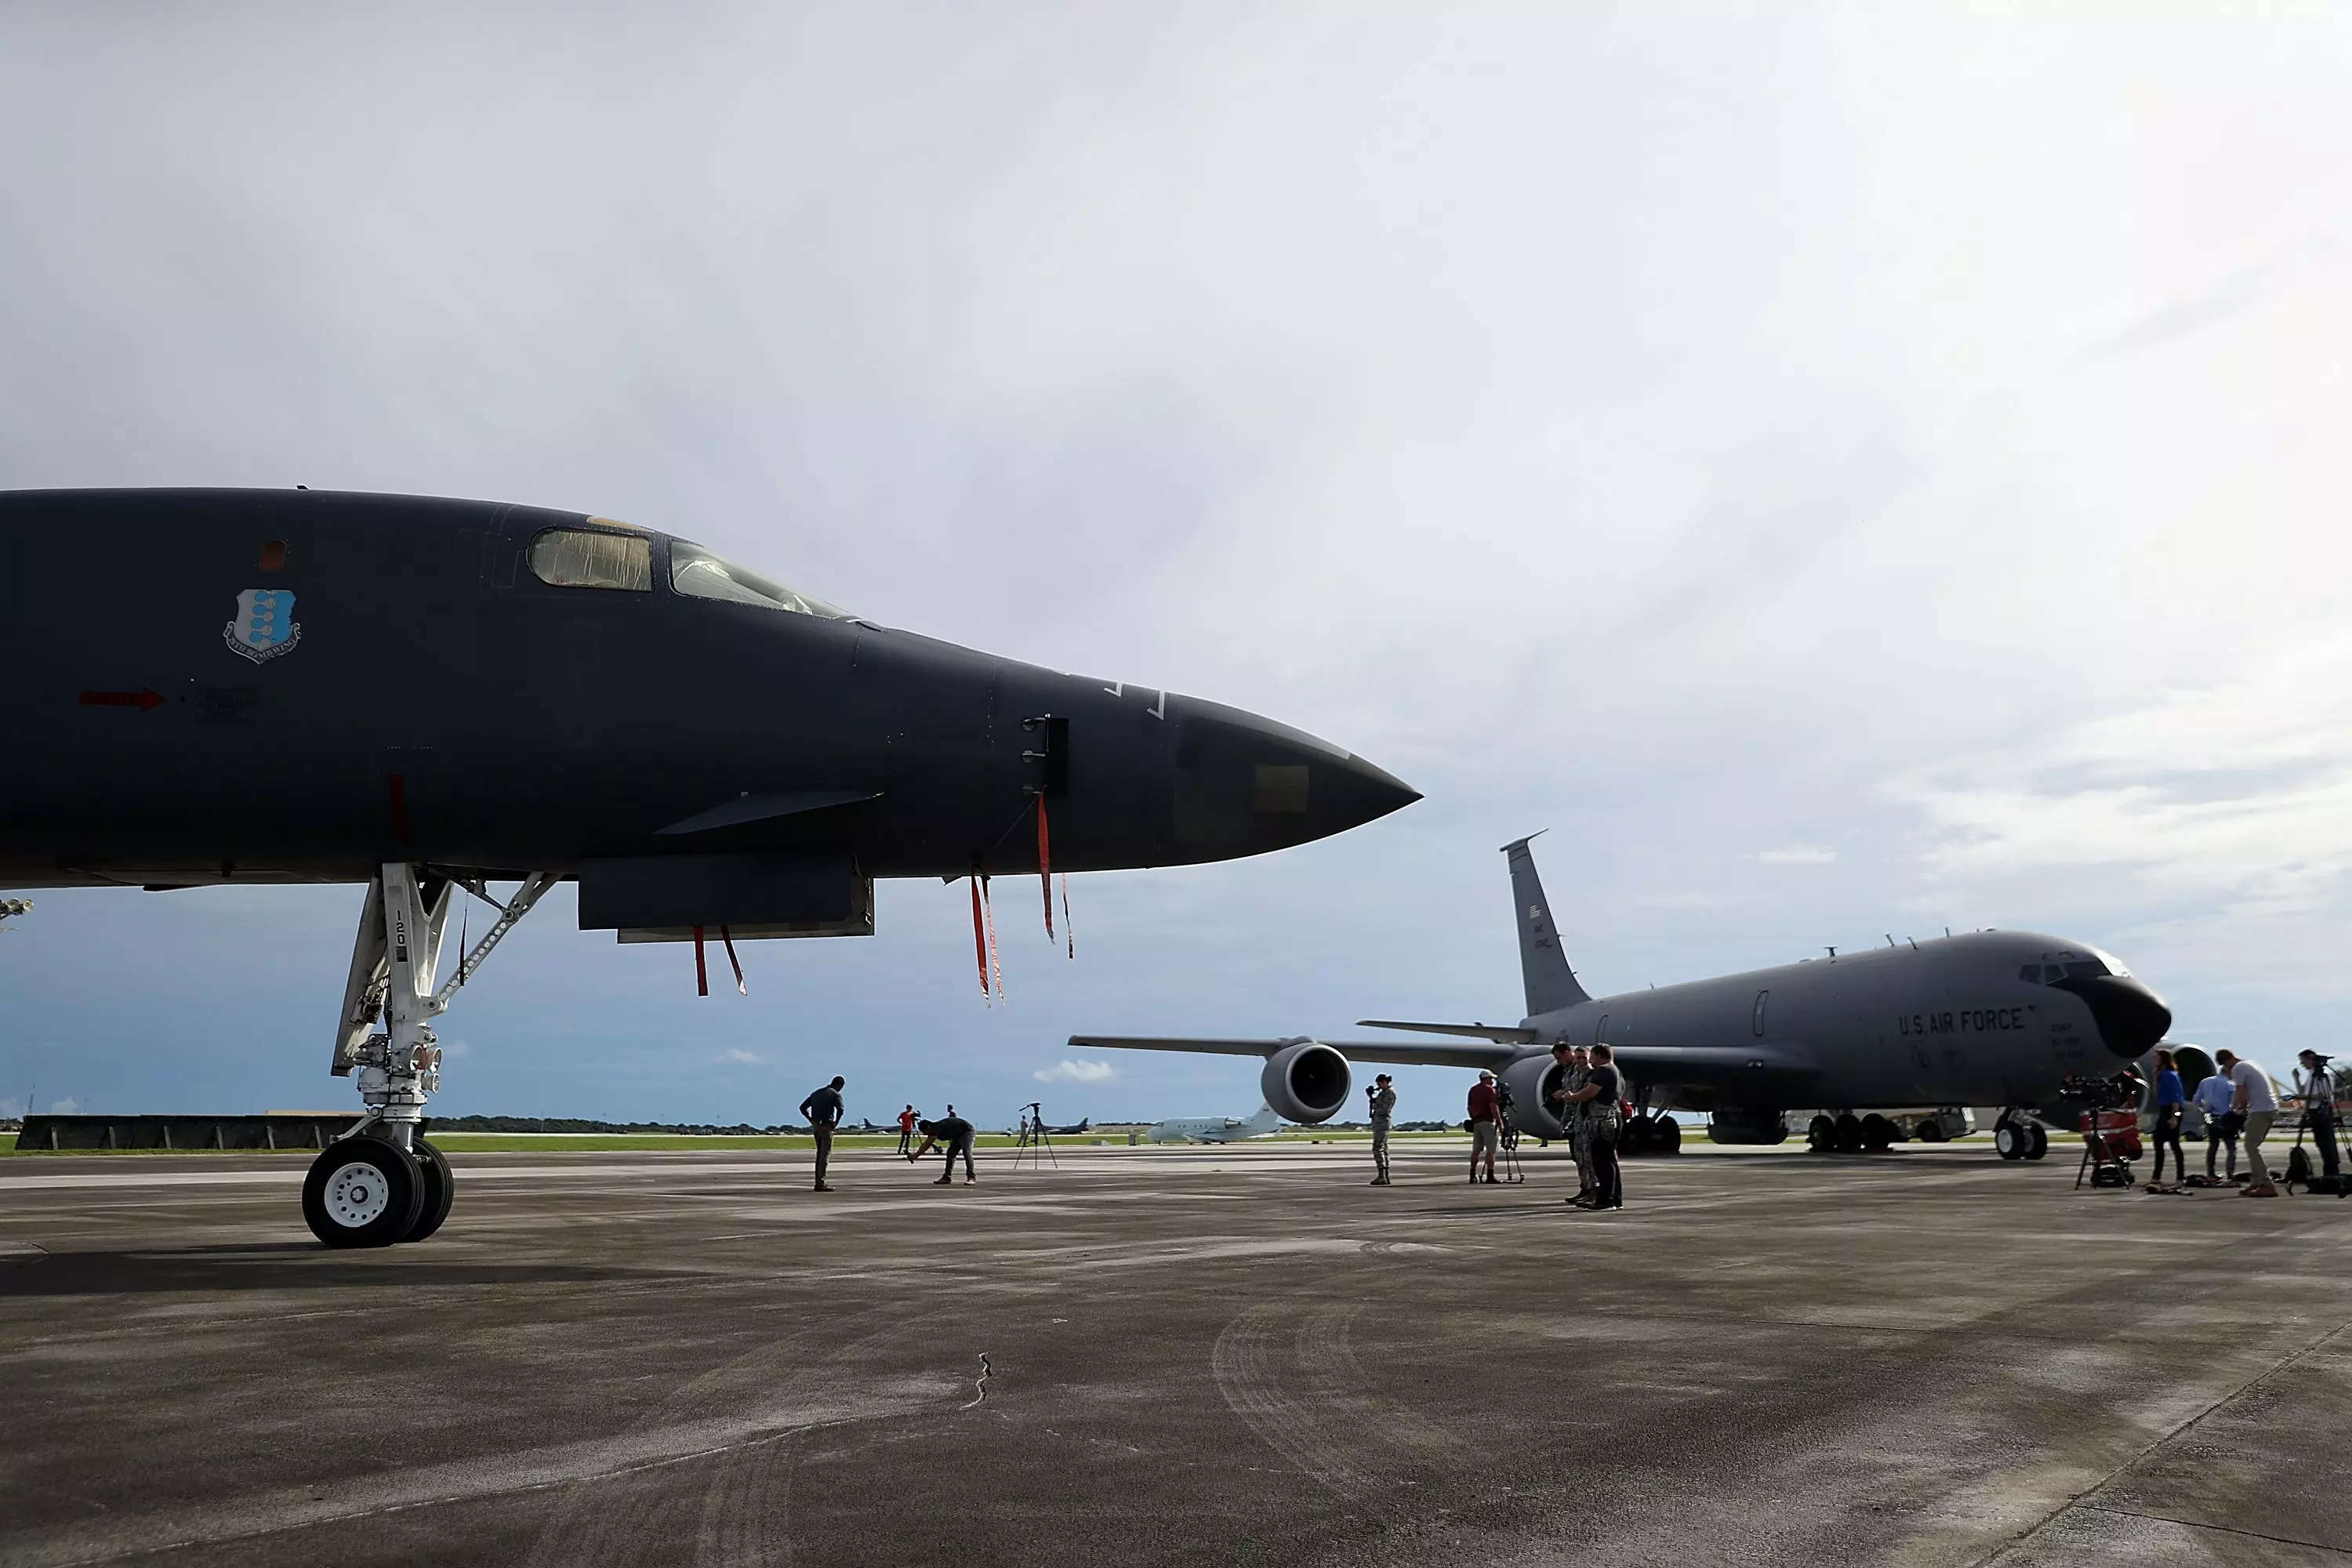 A U.S. Air Force Rockwell B-1B Lancer (L) and a Boeing KC-135 Stratotanker (R) sit on the tarmac at Andersen Air Force base on August 17, 2017 in Yigo, Guam.